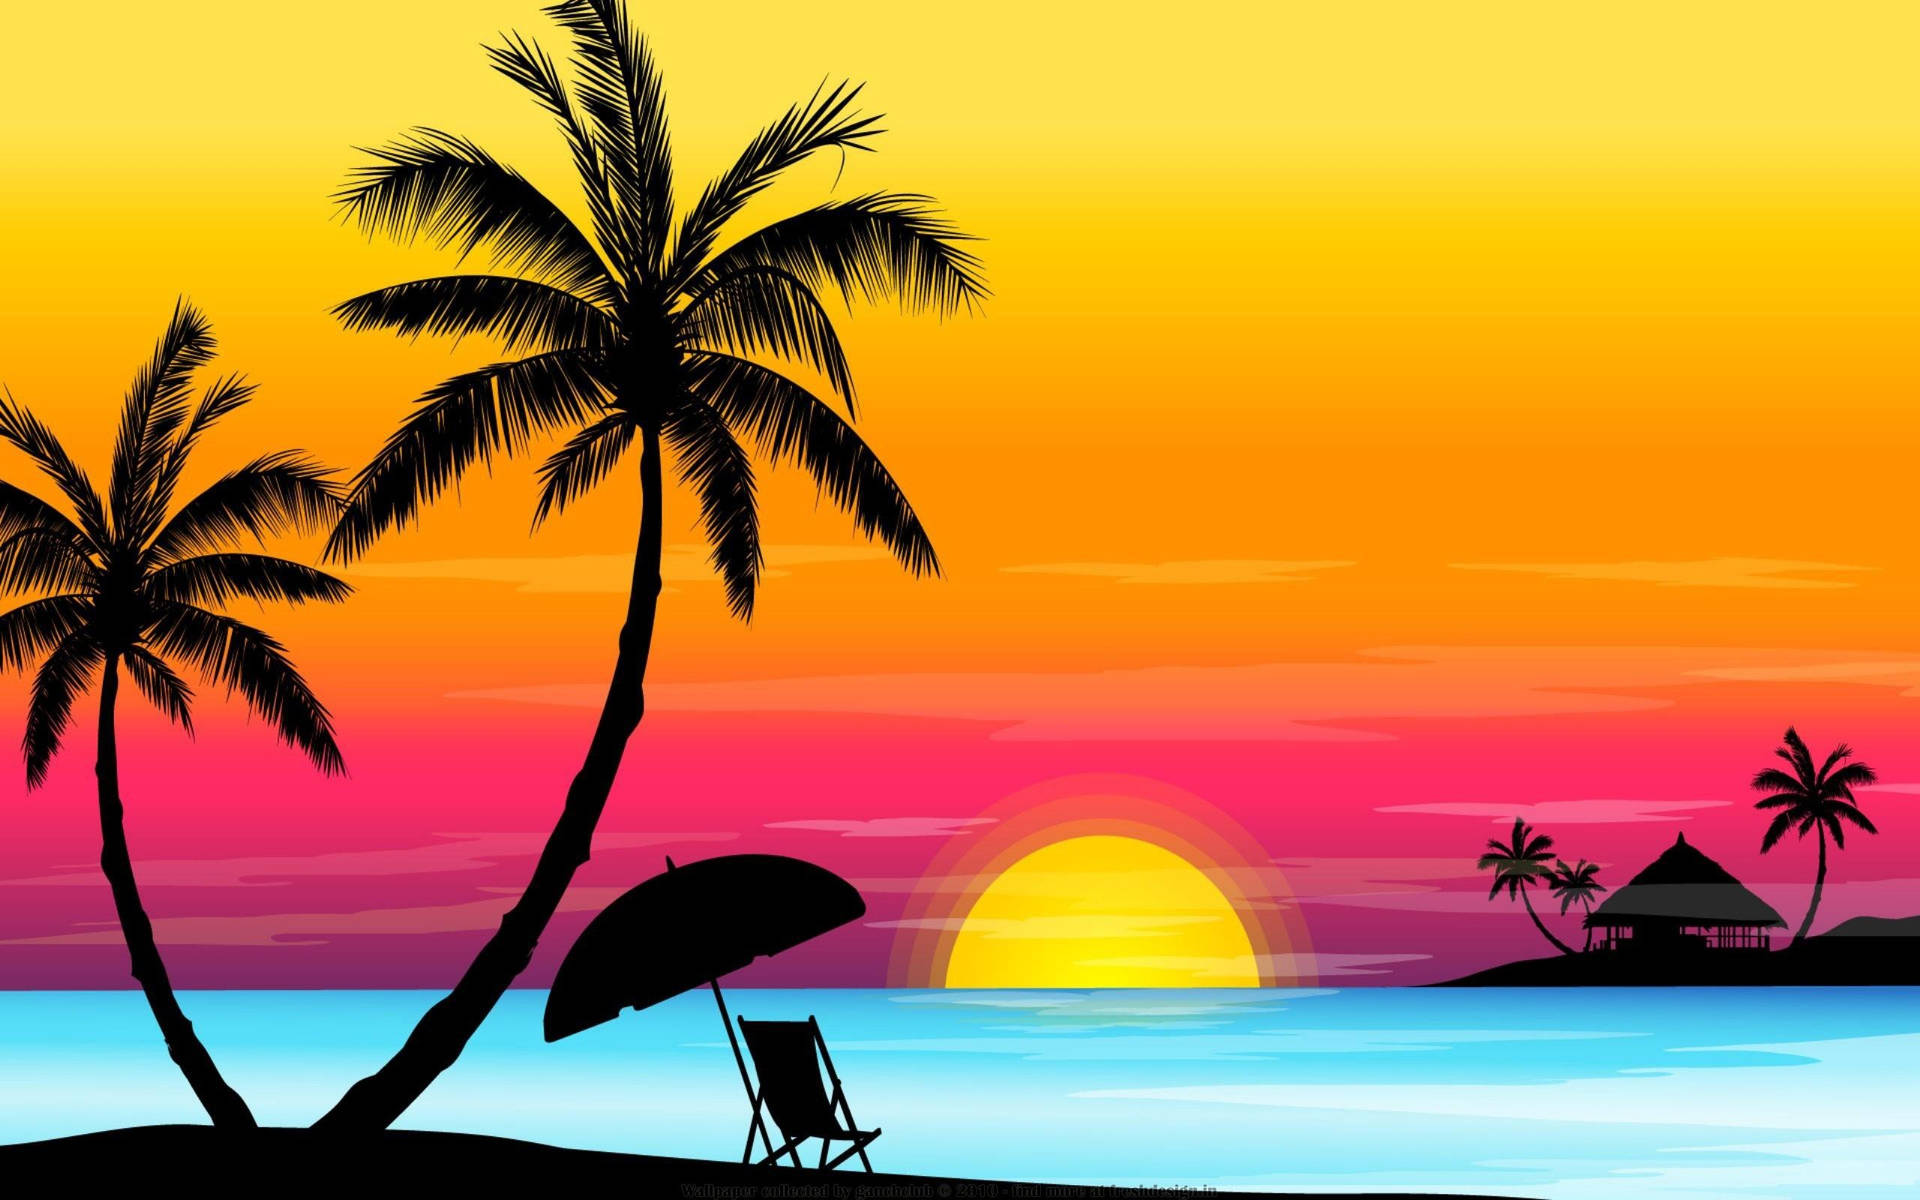 Beach Vacation Silhouette Art Picture